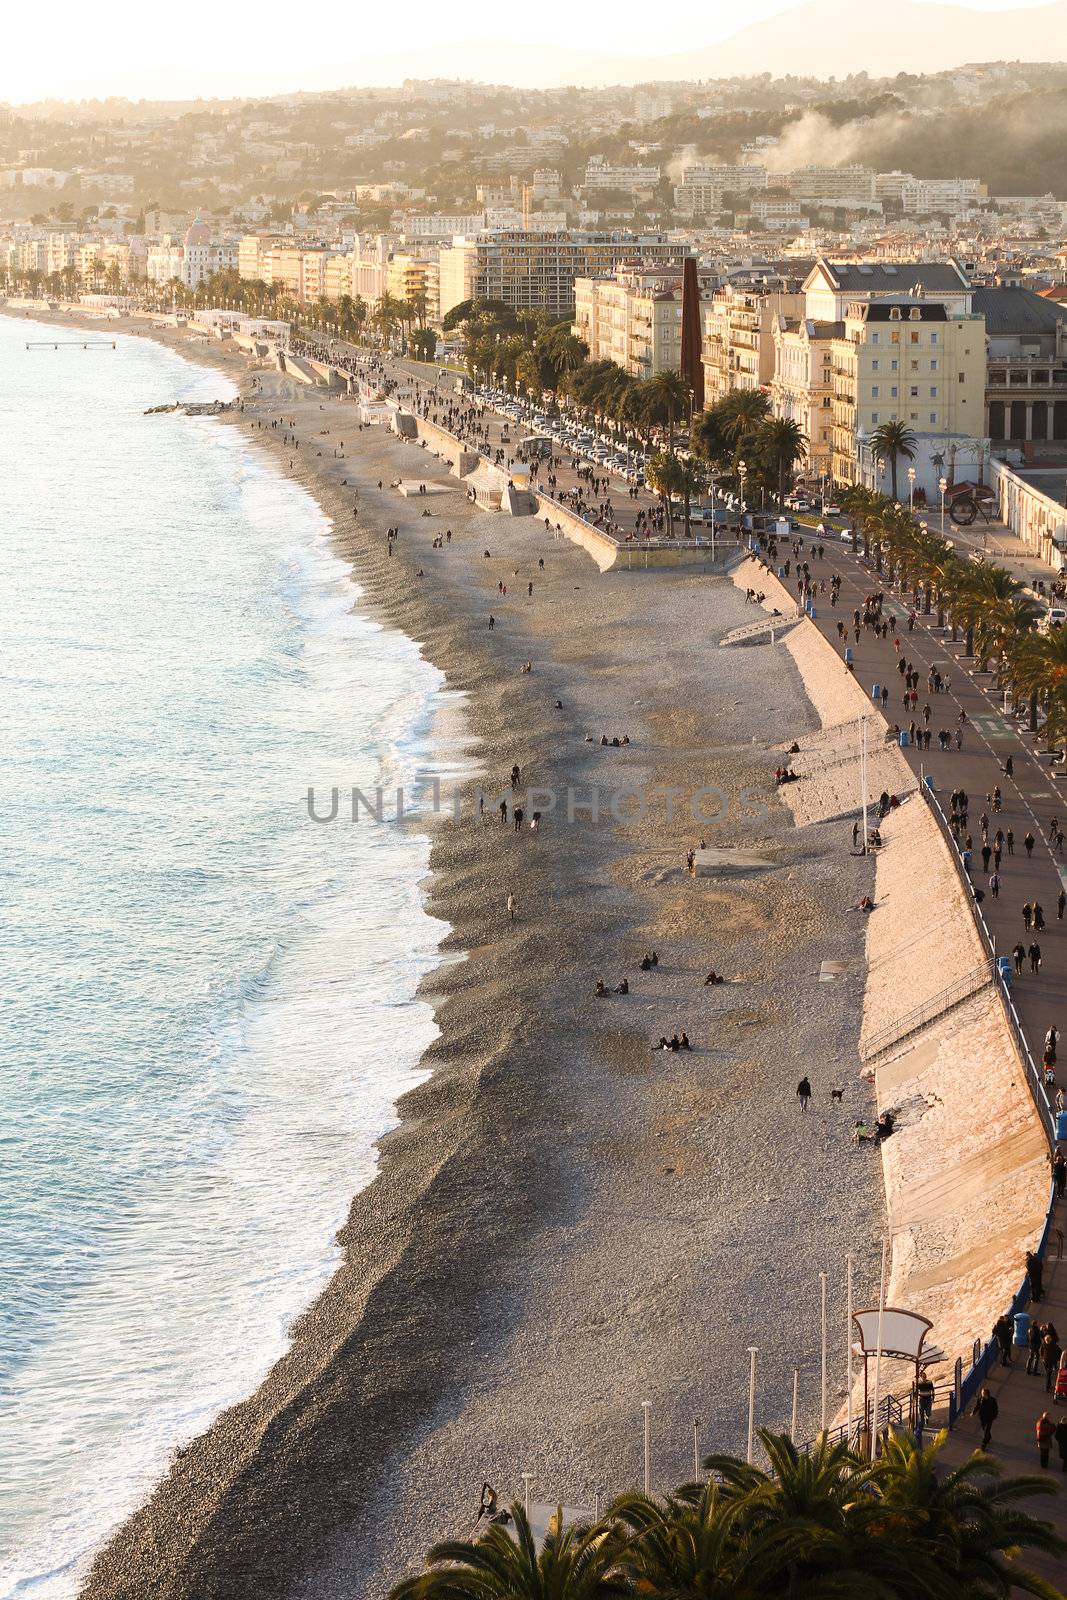 The Promenade at the City of Nice by dwaschnig_photo